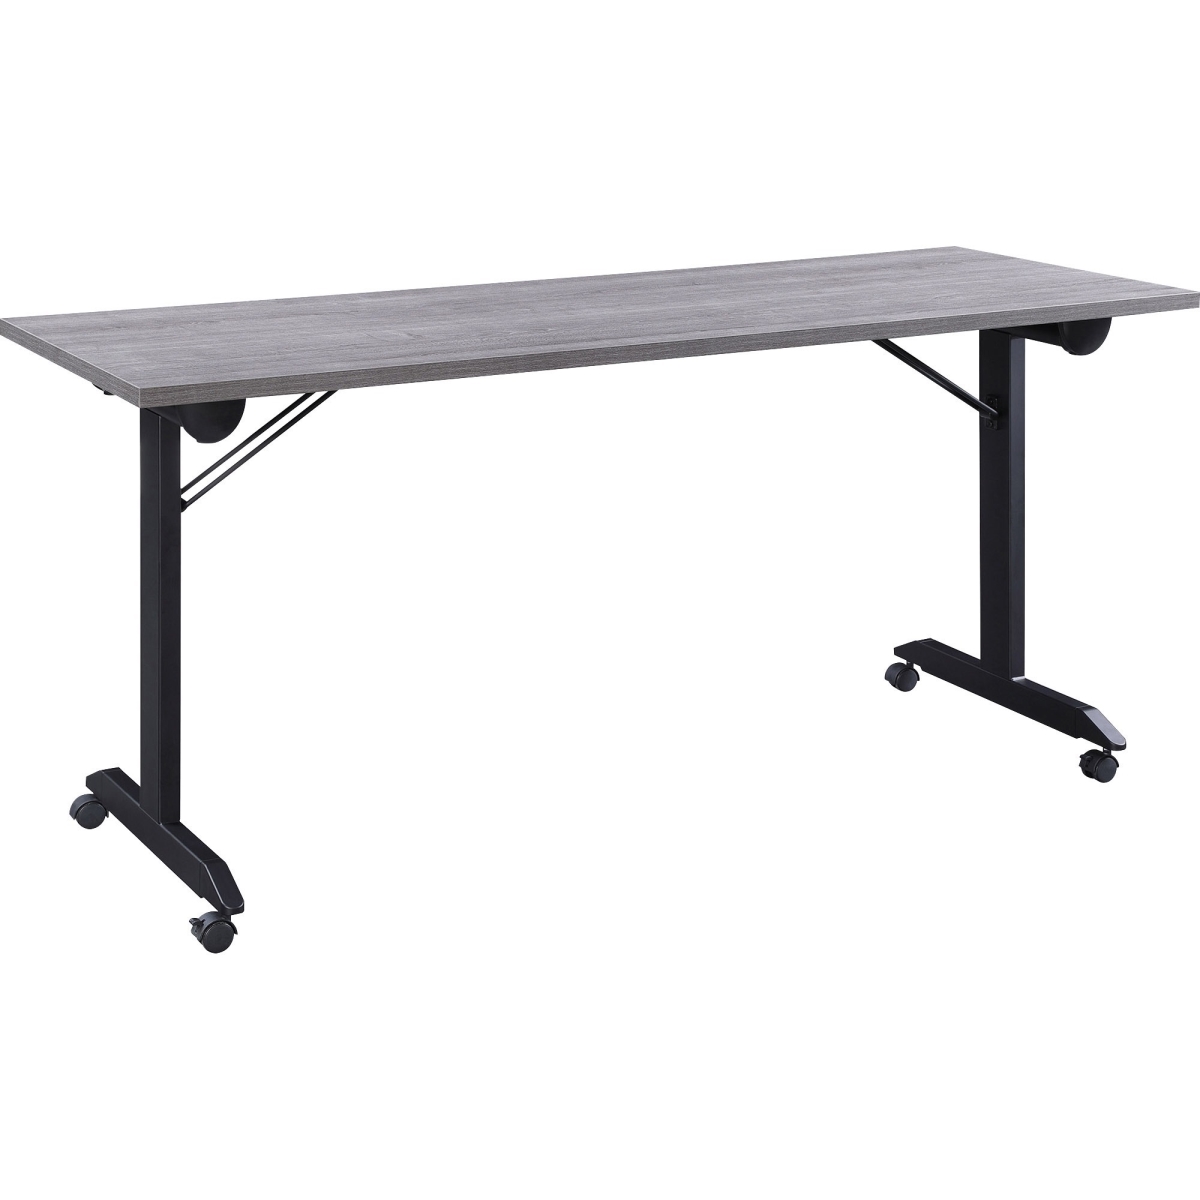 Picture of Lorell LLR60741 63 in. Mobile Folding Training Table - Gray